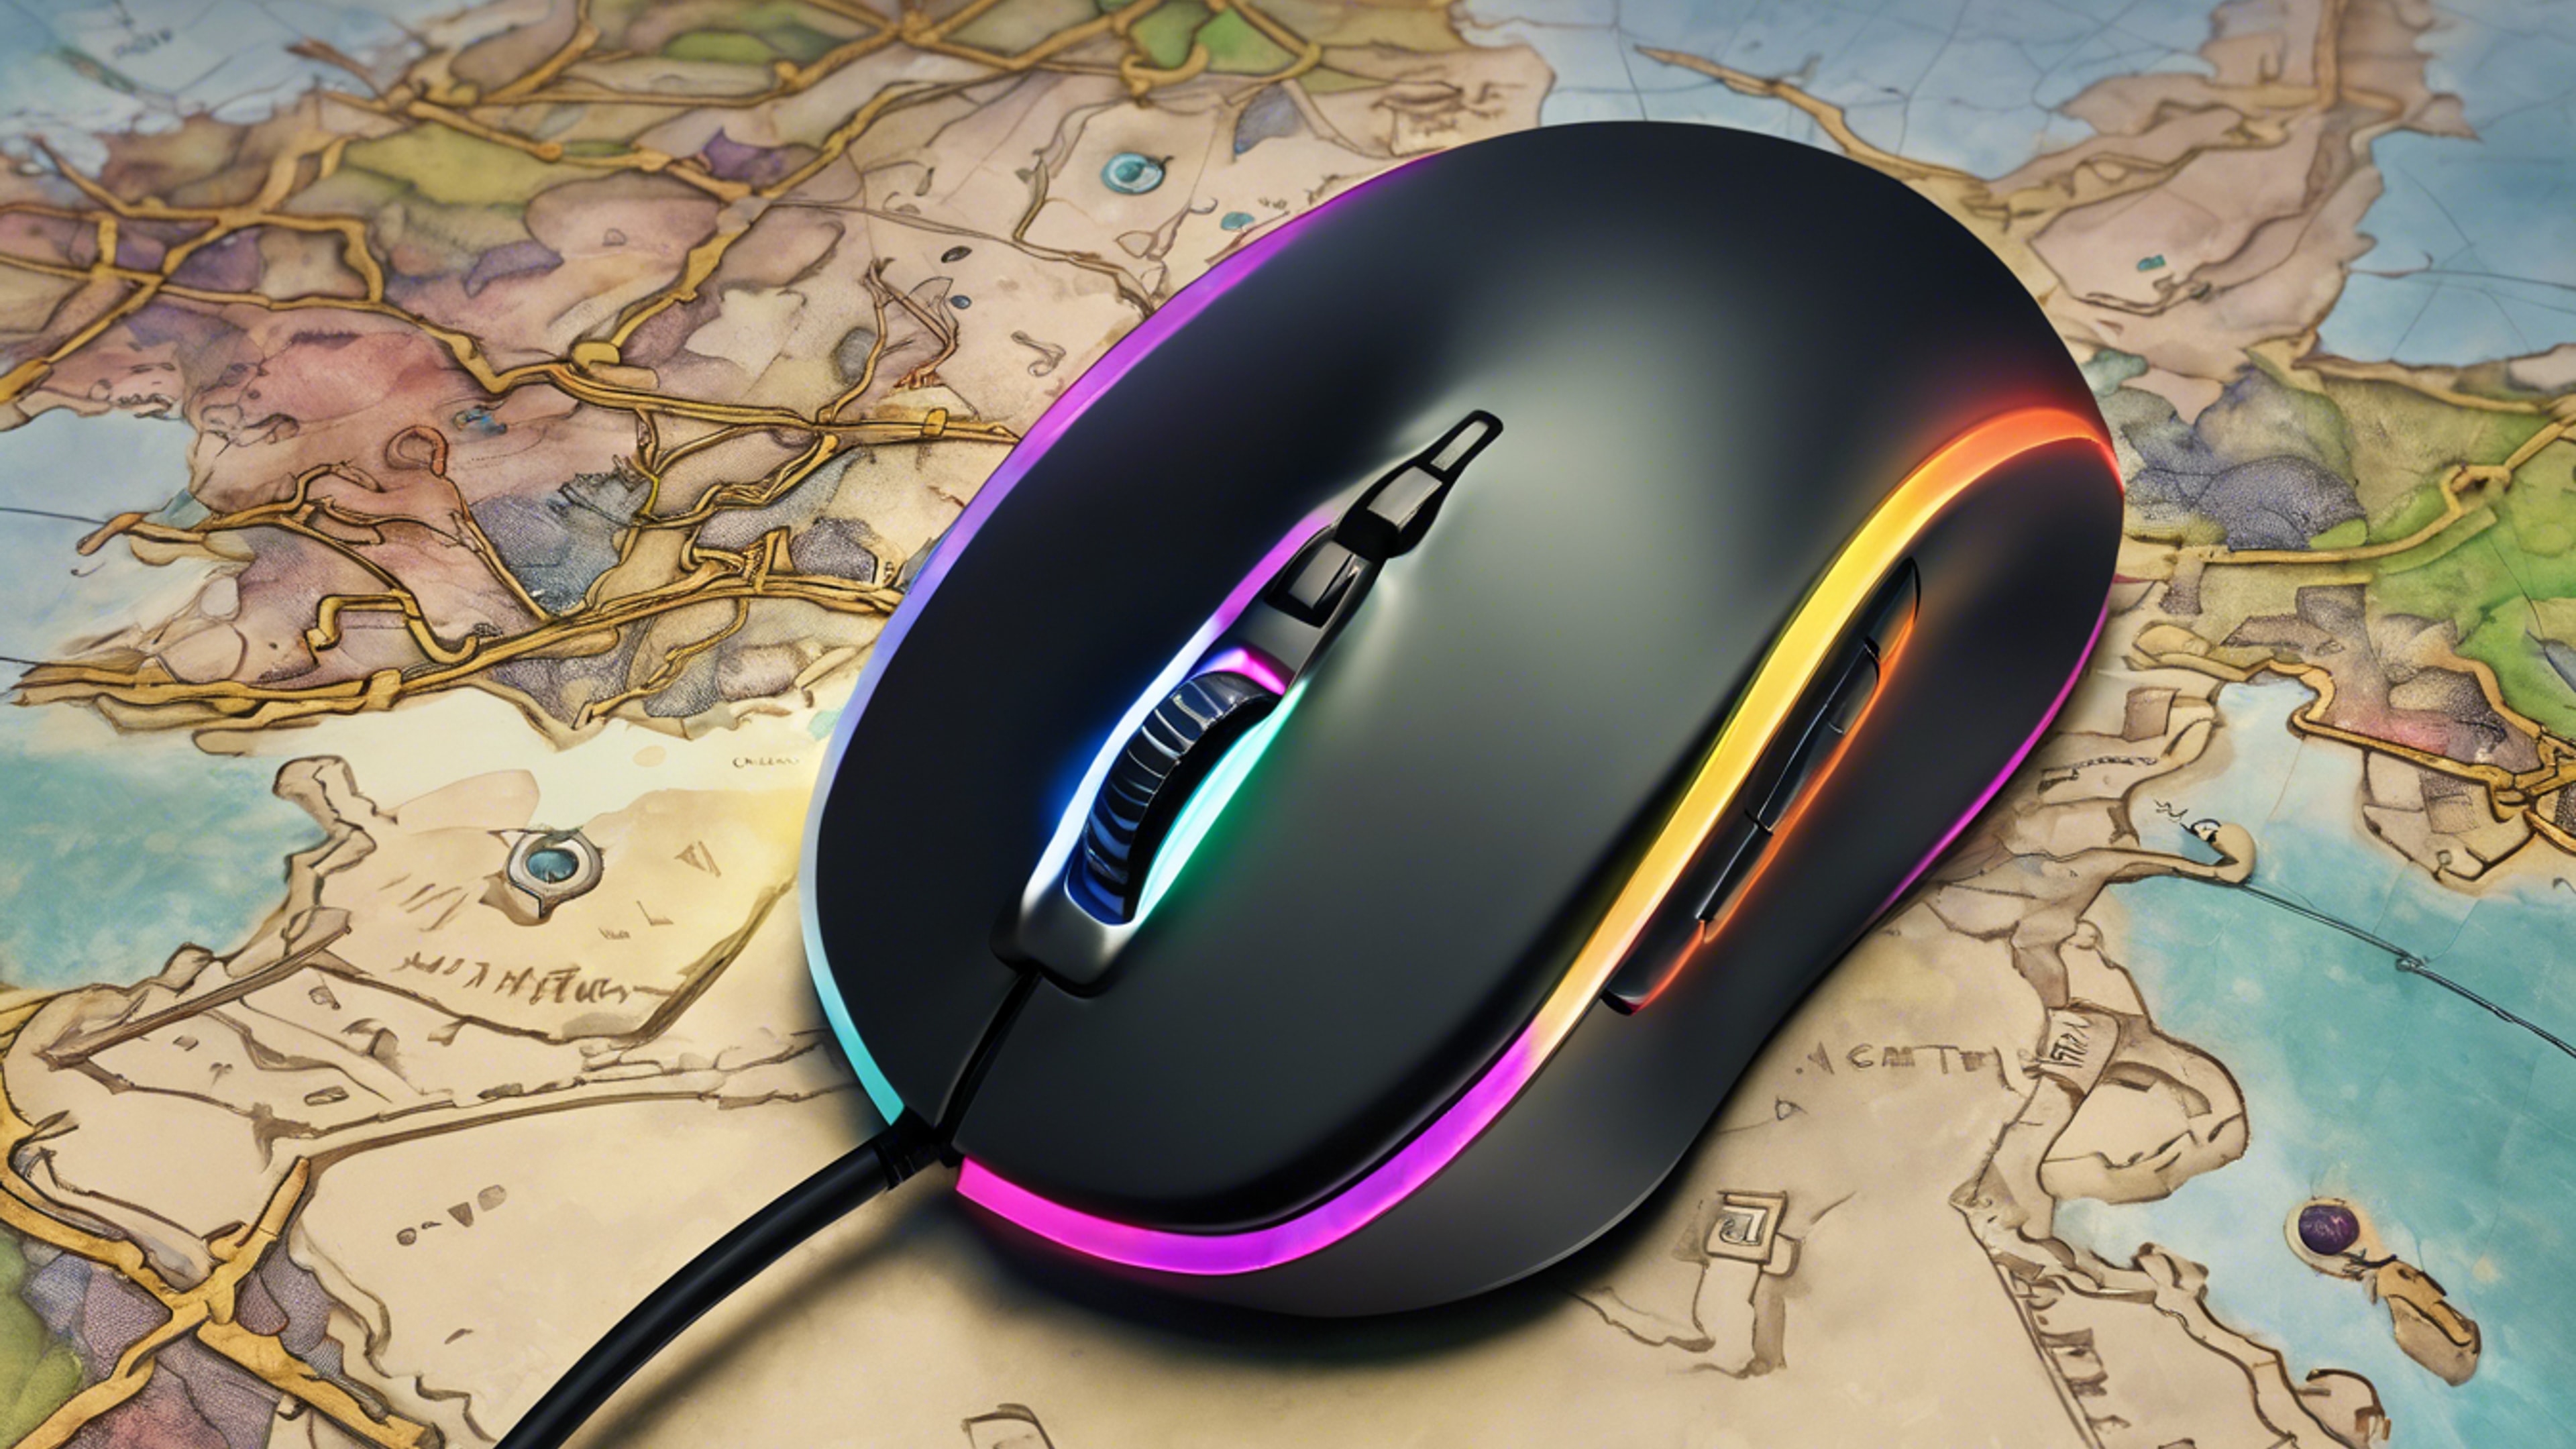 A close up of black gaming mouse with multicoloured lights, placed on a mouse pad with a map of a fantasy world. טפט[91f93c56765f47f0bd9c]